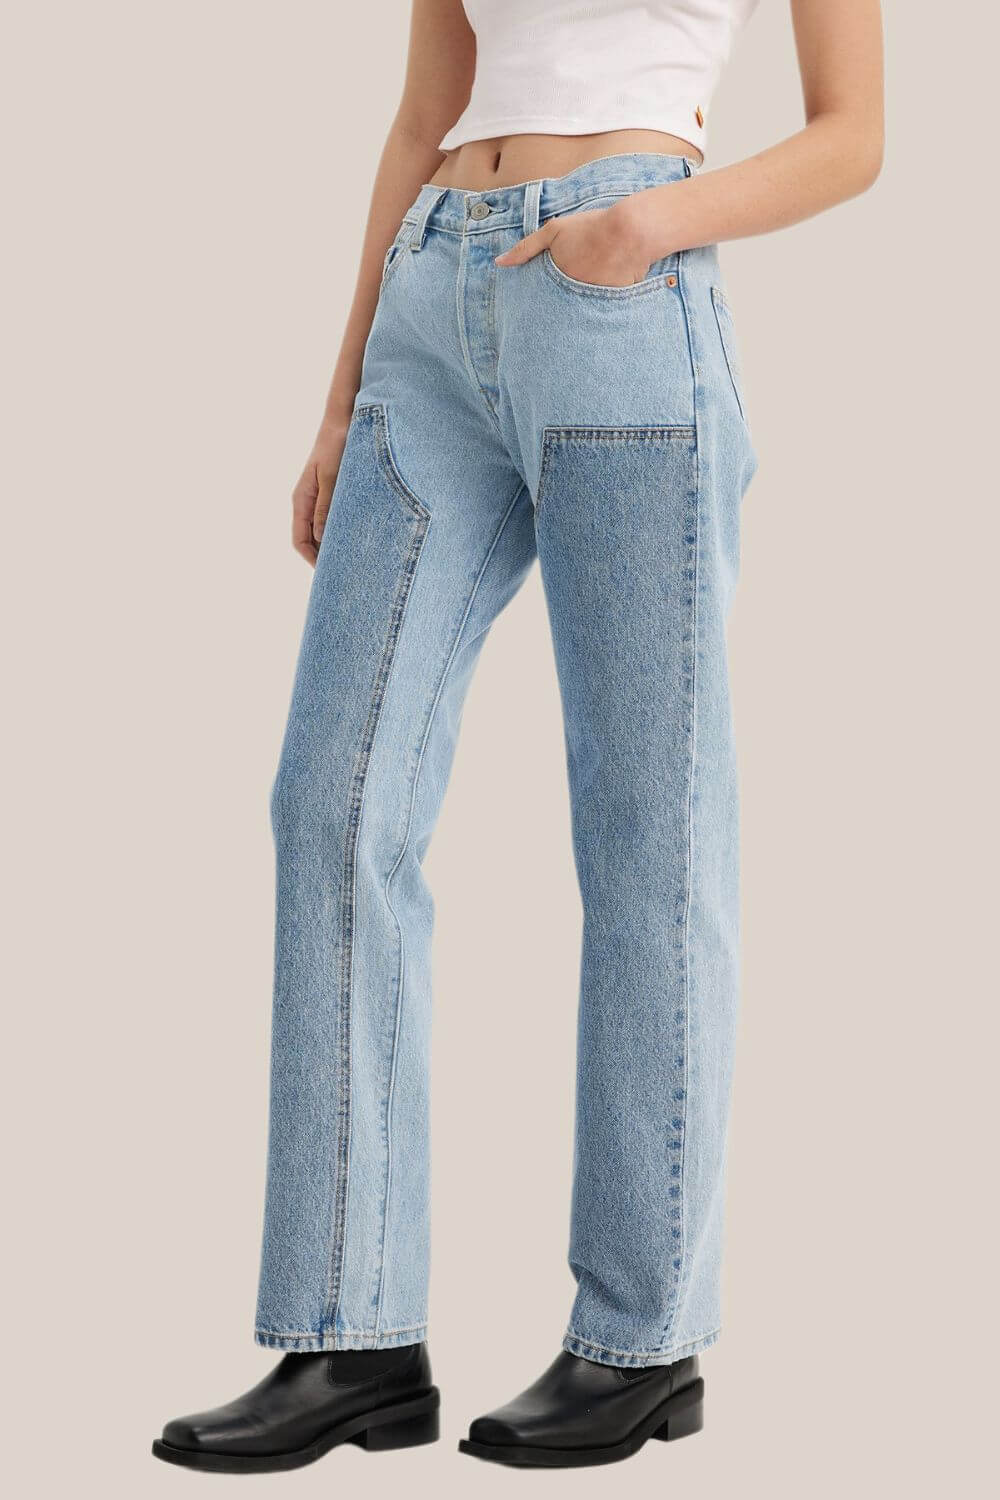 Levi Womens 501 90s Chaps Done and Dusted Jeans